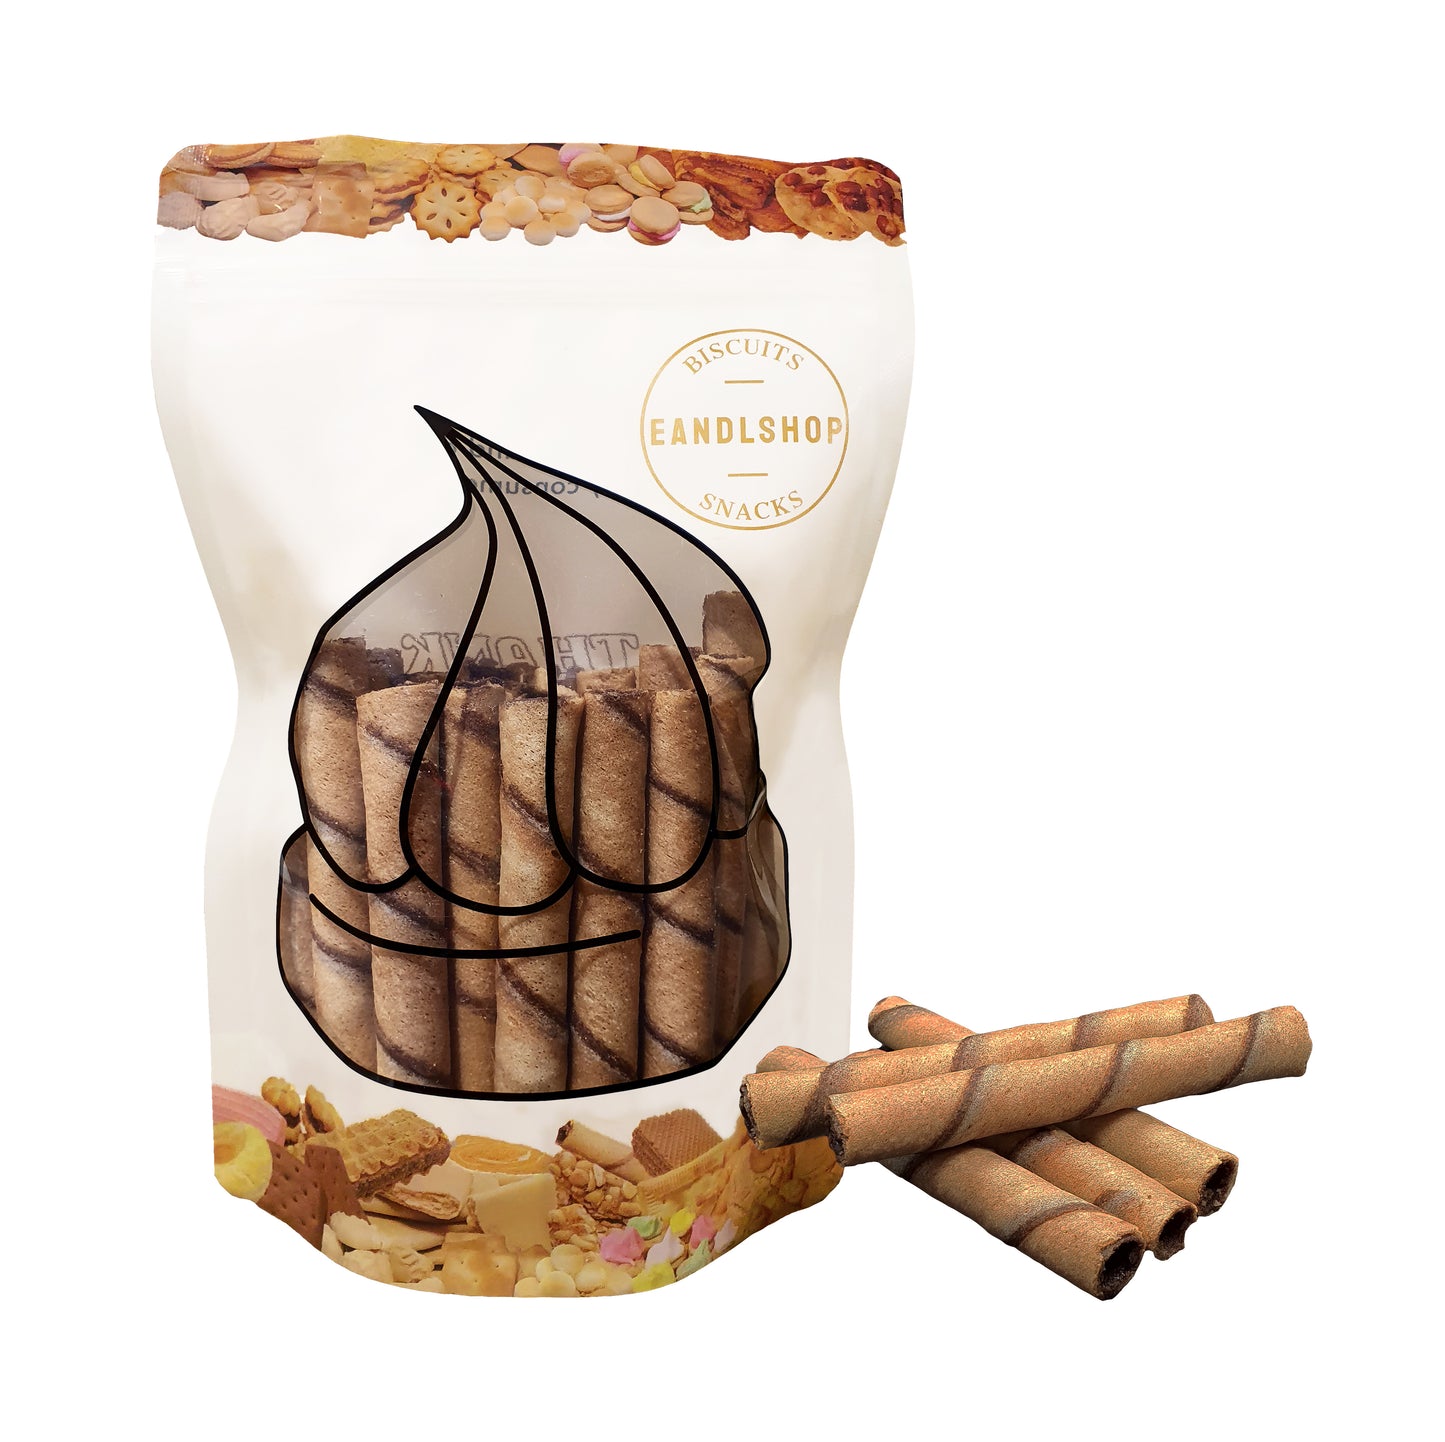 Chocolate Roll. Old-school biscuits, modern snacks (chips, crackers), cakes, gummies, plums, dried fruits, nuts, herbal tea – available at www.EANDLSHOP.com